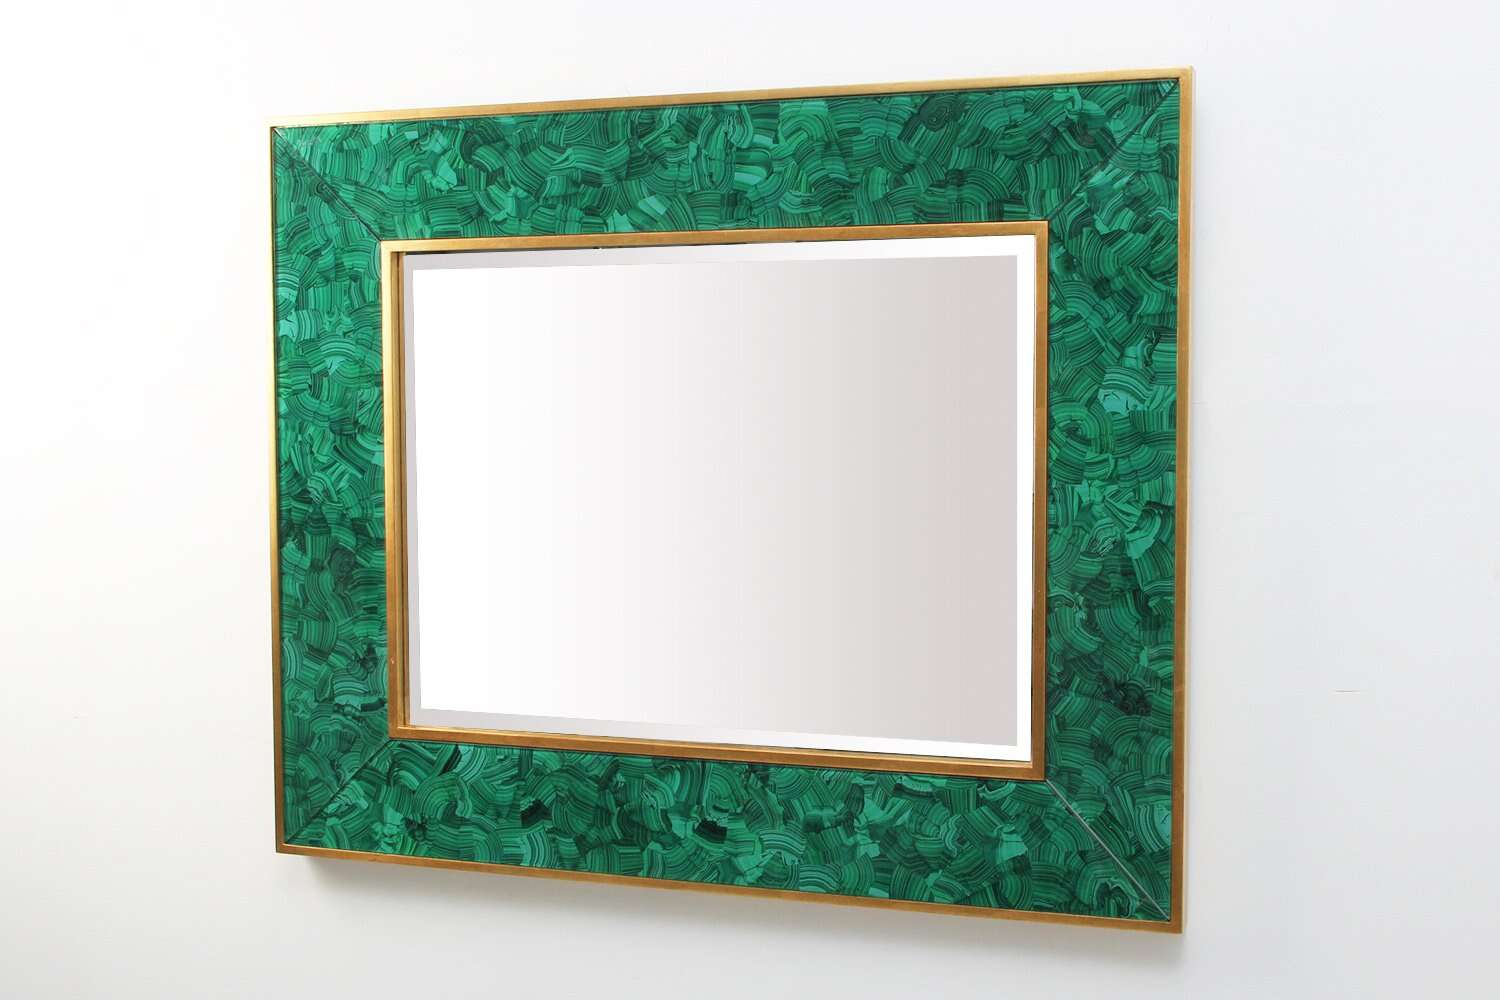 Forwood Design malachite and gold wall mirror hall mirror